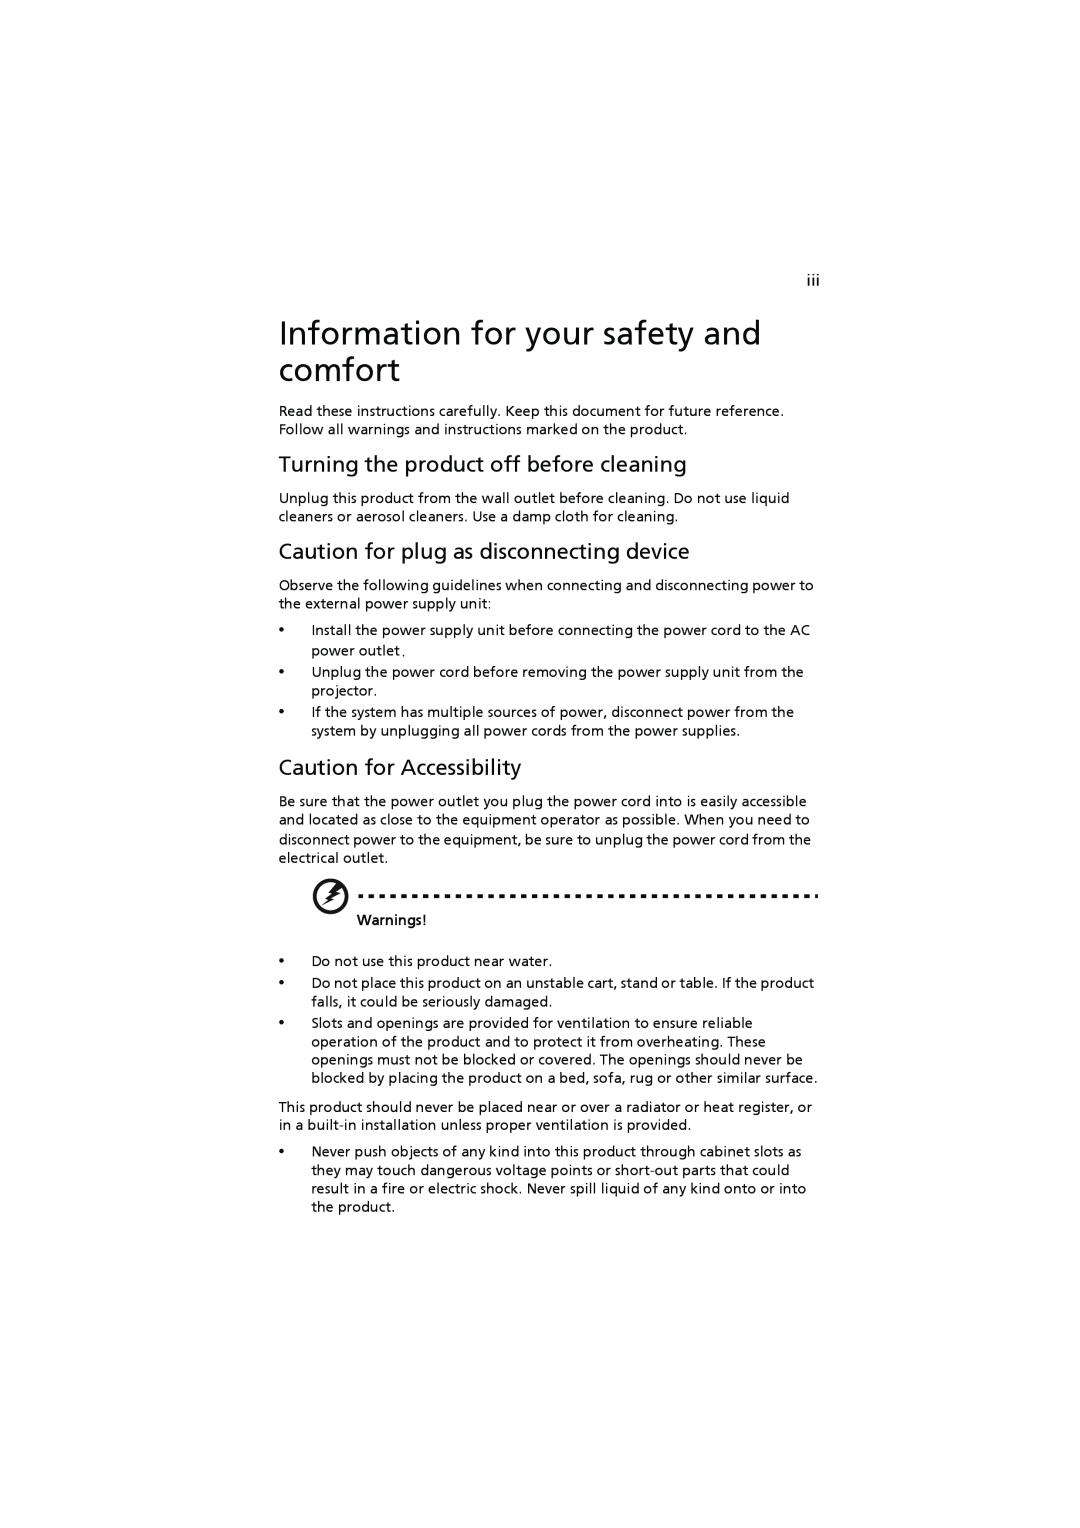 Acer P1100 Information for your safety and comfort, Turning the product off before cleaning, Caution for Accessibility 